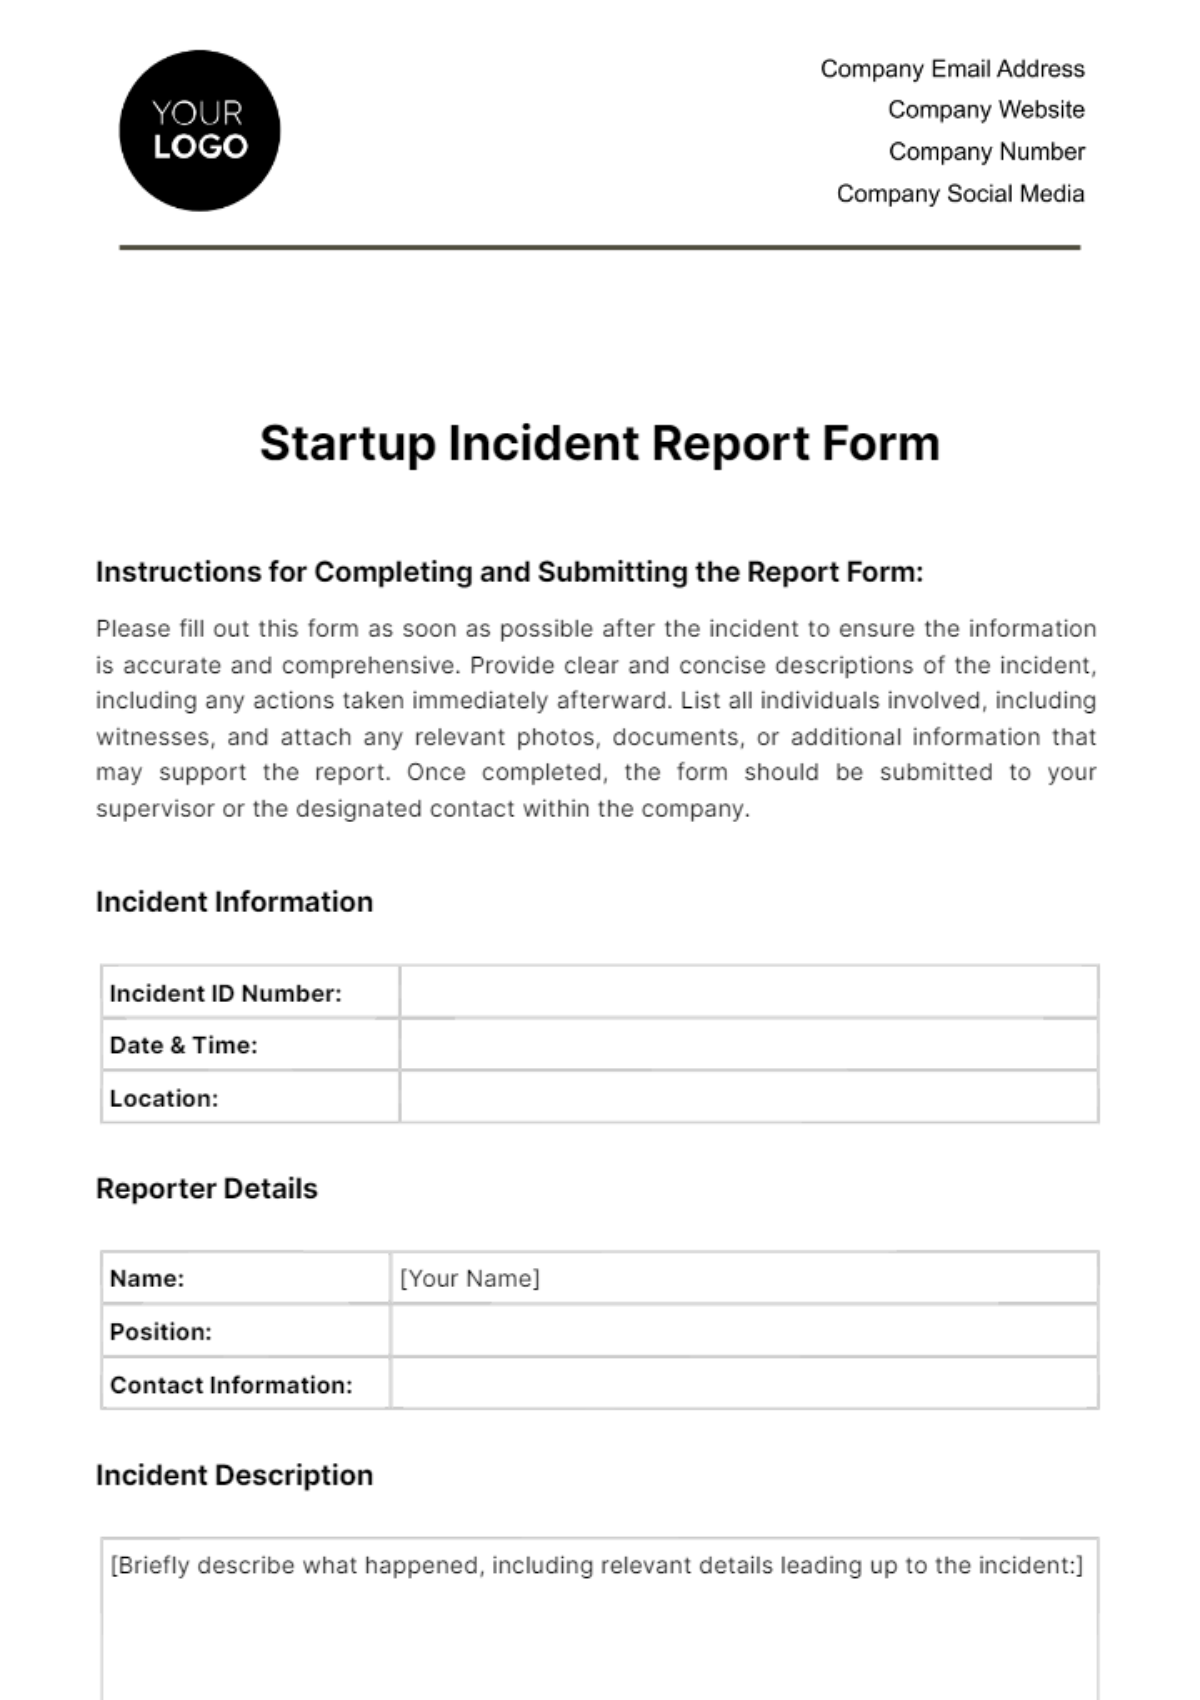 Free Startup Incident Report Form Template